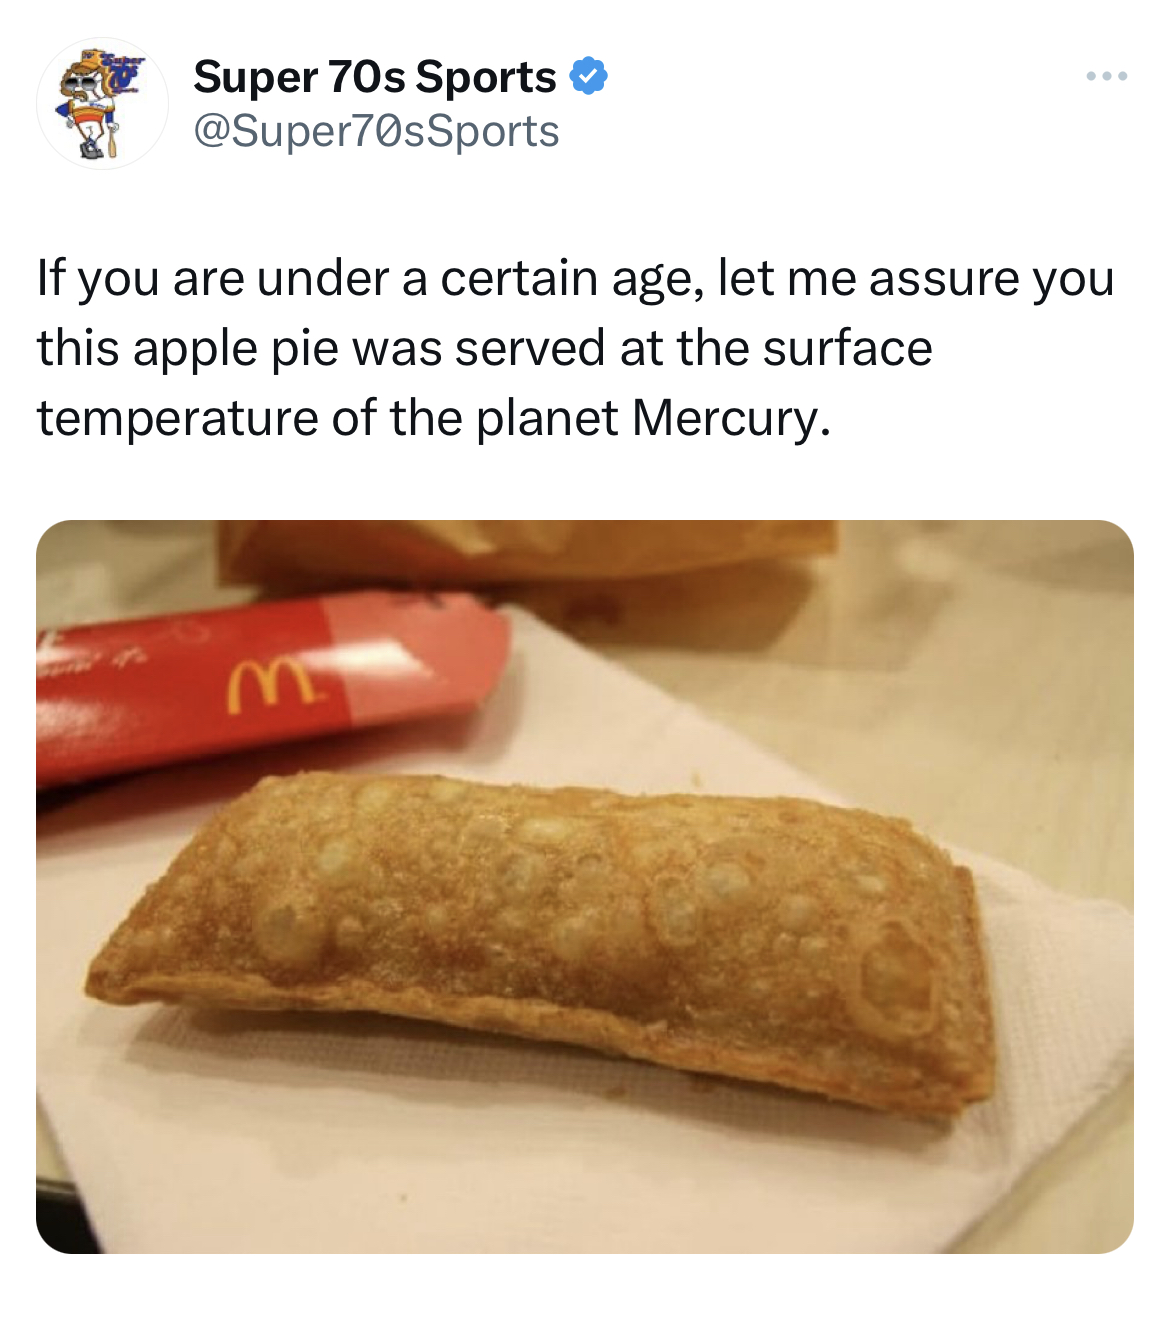 savage tweets - pasty - Super 70s Sports www. If you are under a certain age, let me assure you this apple pie was served at the surface temperature of the planet Mercury.